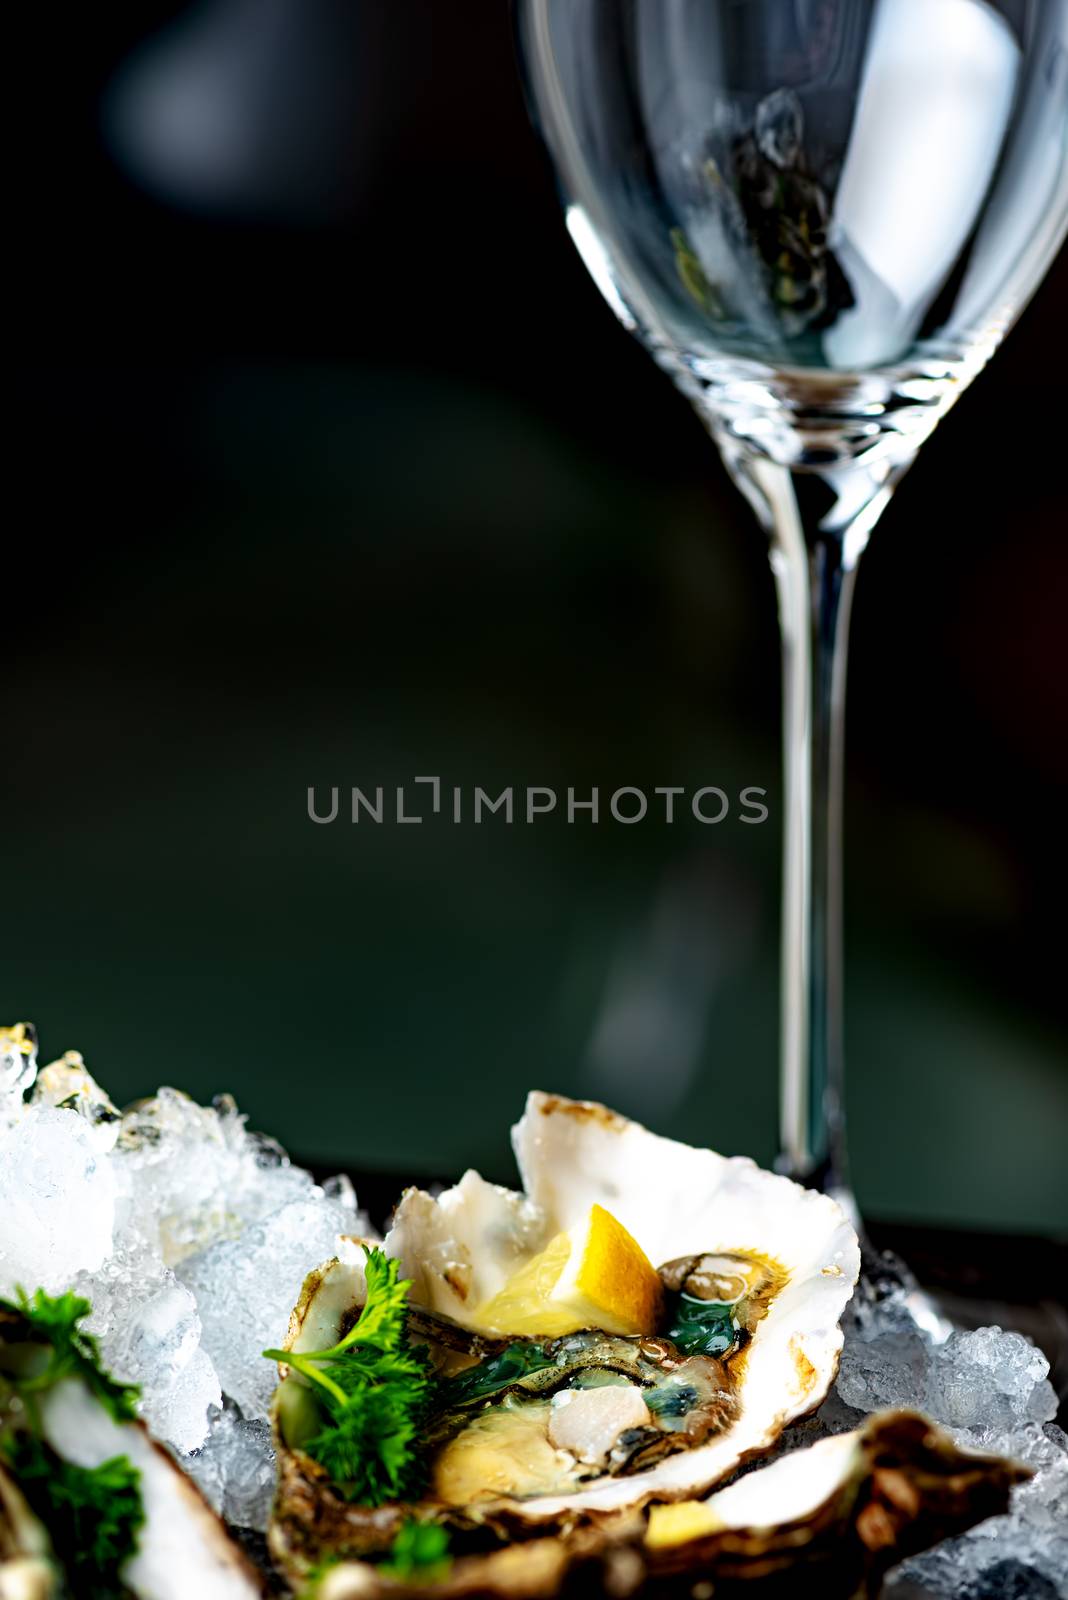 Raw opened oysters on crushed ice by Nanisimova